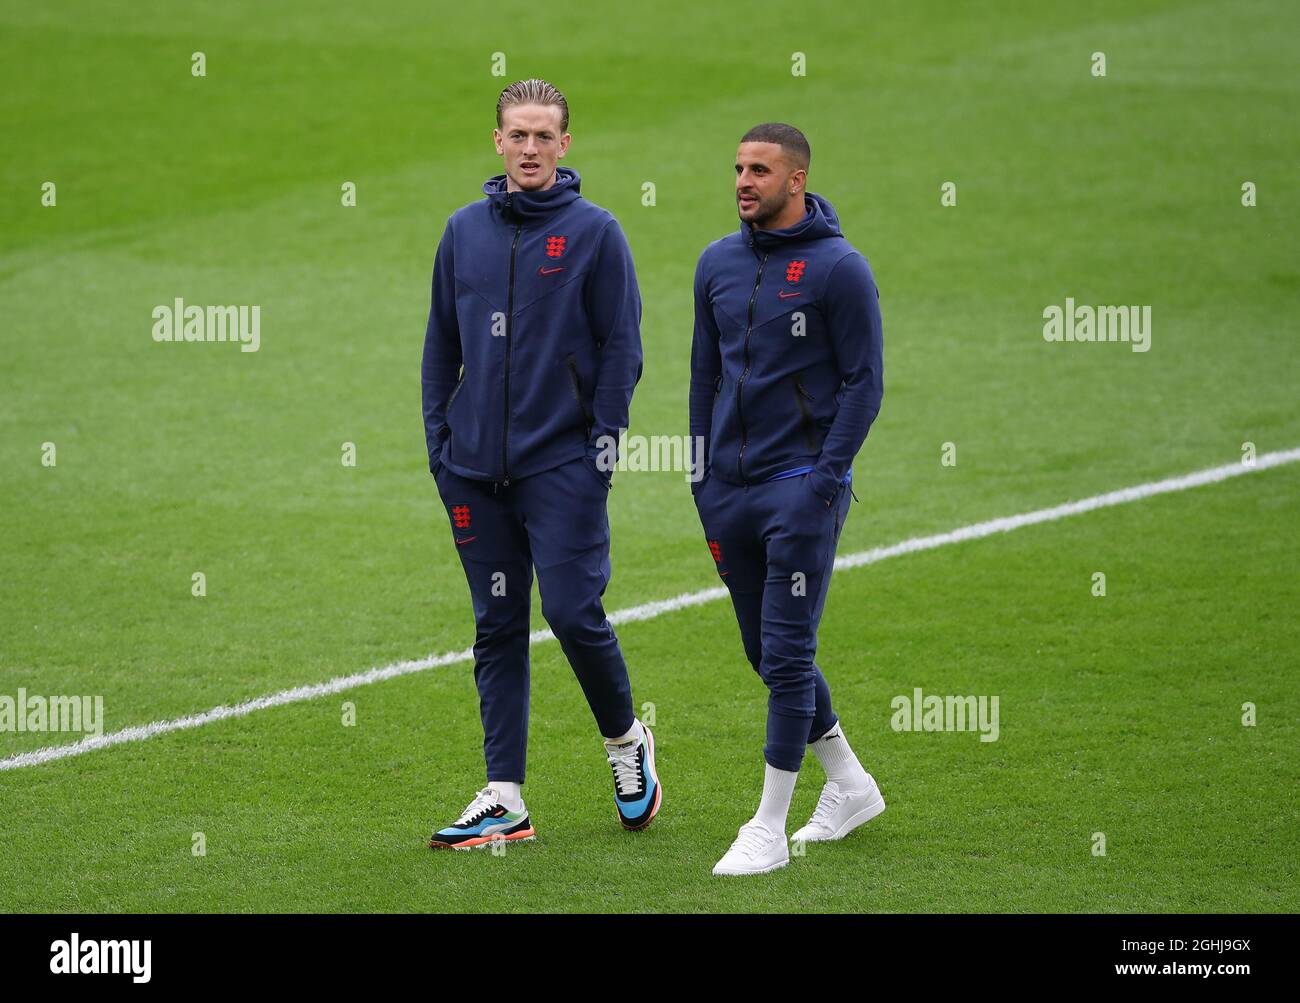 London, England, 11th July 2021. Jordan Pickford of England and Kyle Walker of England before the UEFA European Championships final at Wembley Stadium, London. Picture credit should read: David Klein / Sportimage via PA Images Stock Photo